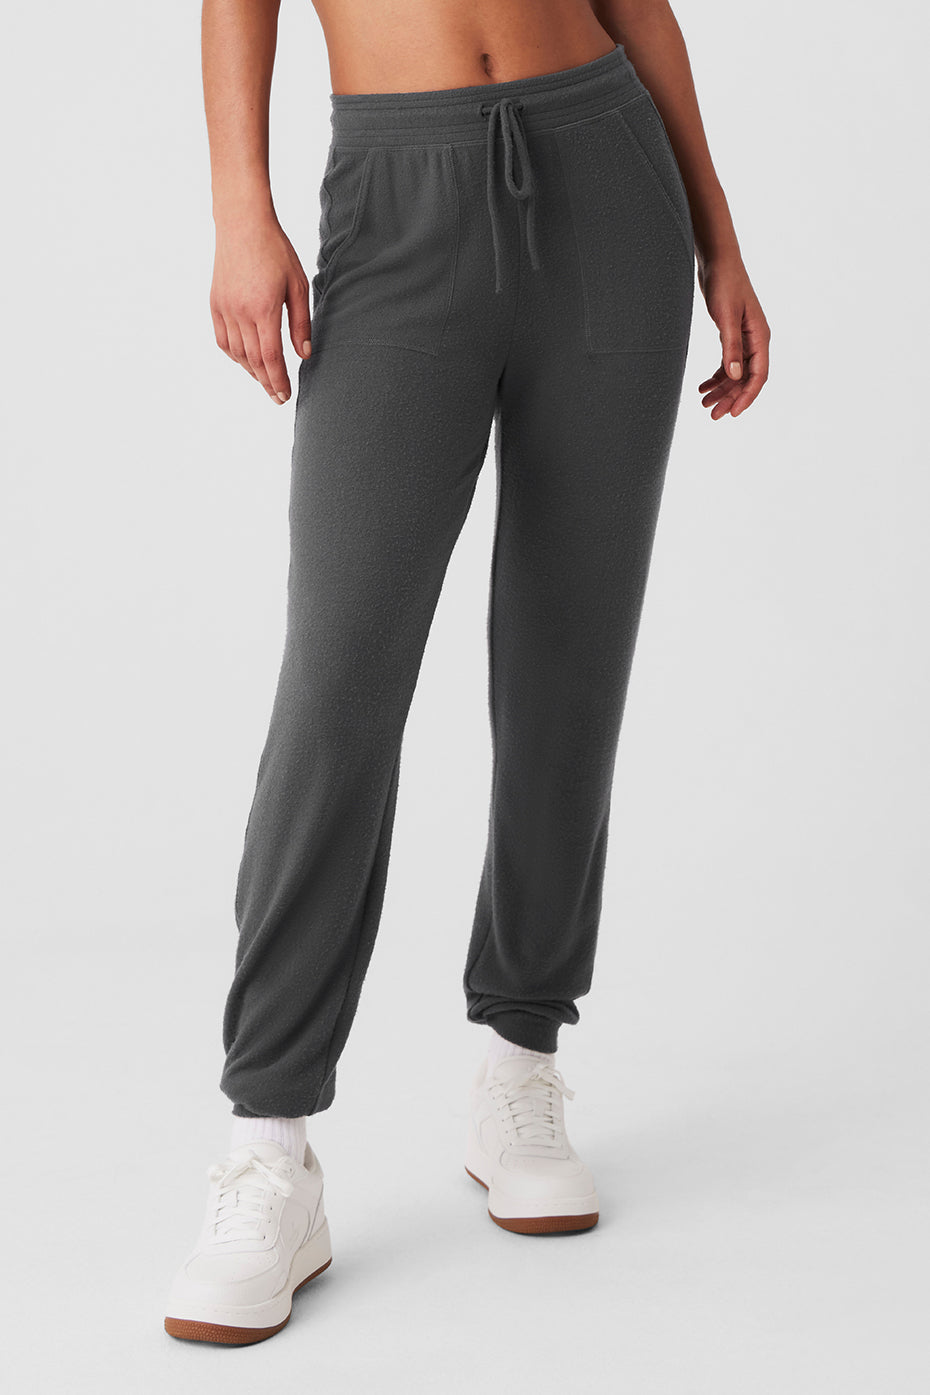 Buy Alo Soho Sweatpants - Anthracite At 58% Off